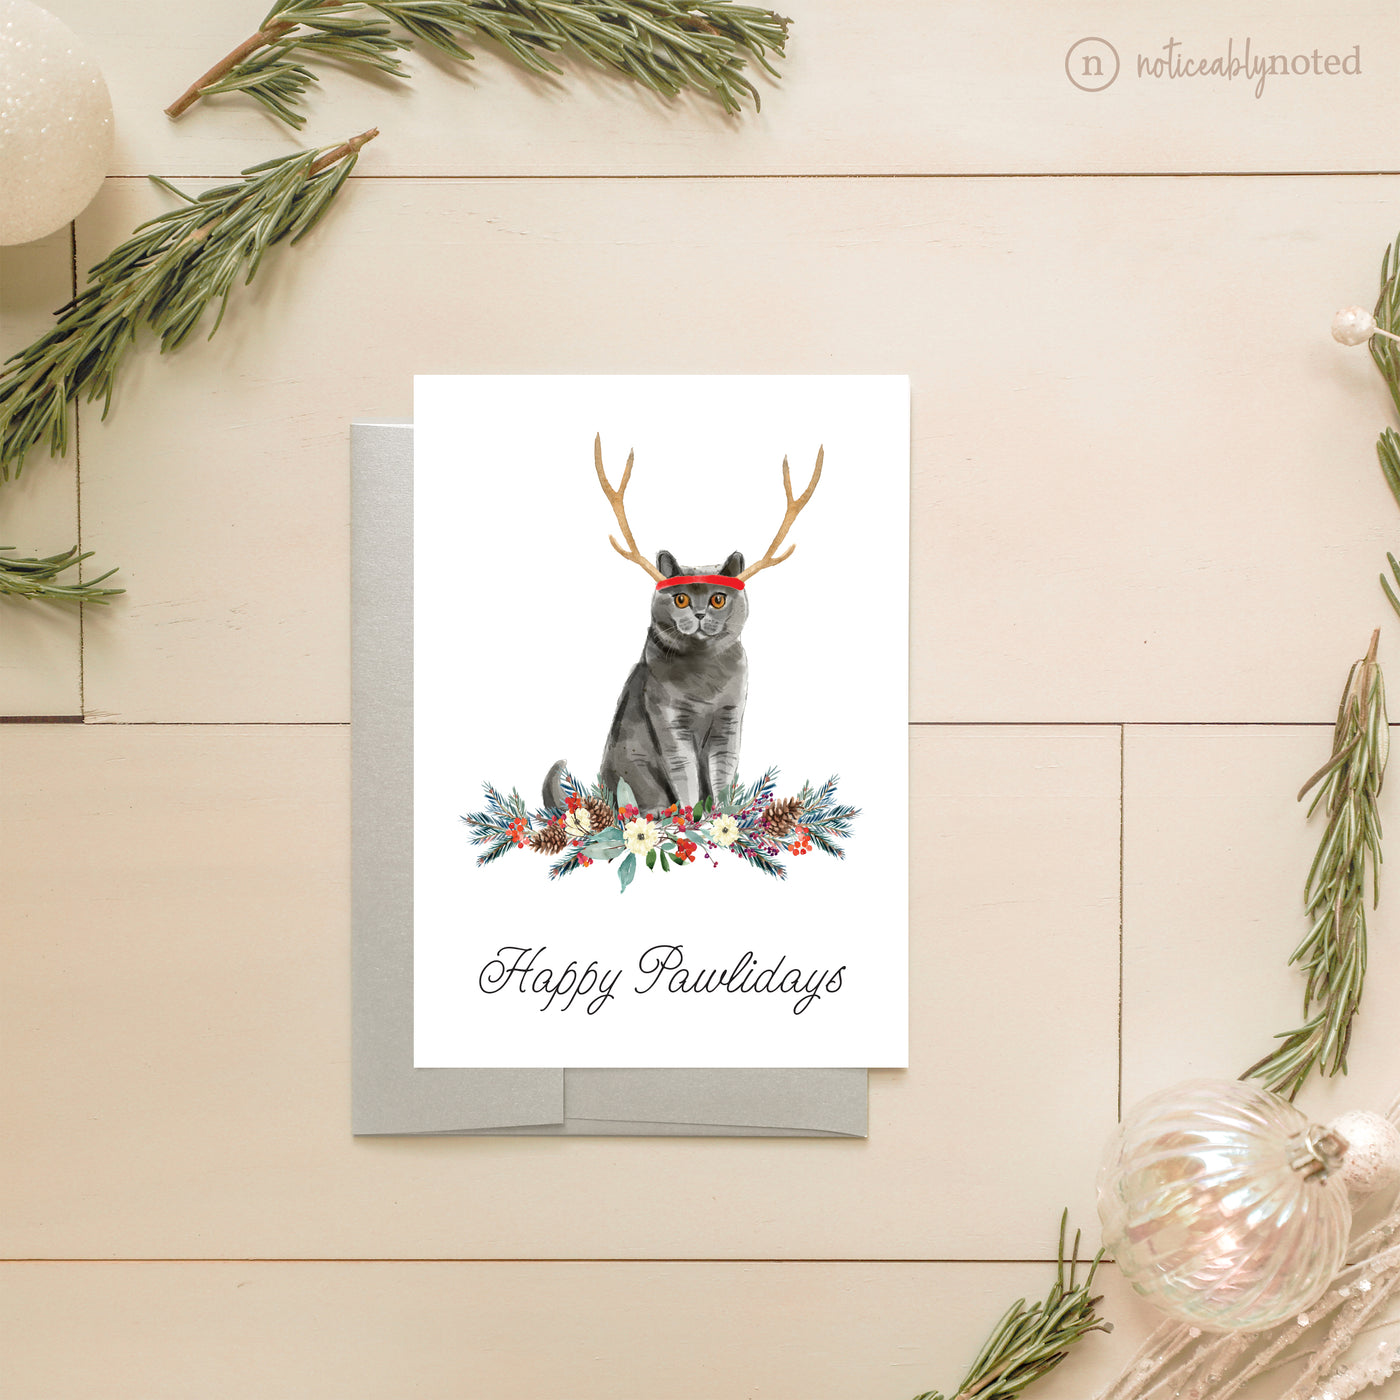 British Shorthair Christmas Card | Noticeably Noted